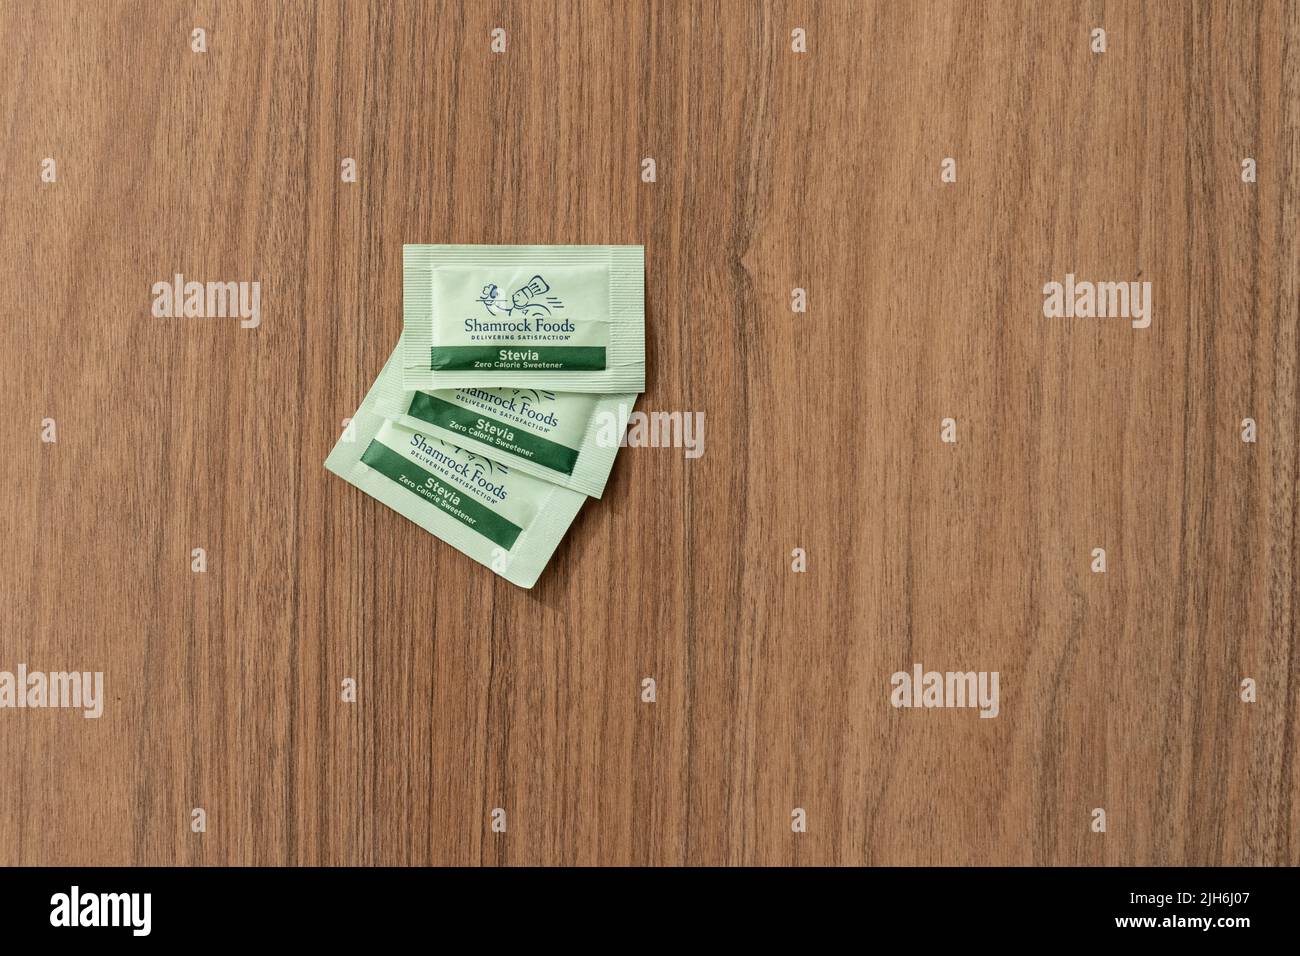 Colorado Springs, CO - July 6, 2022: Shamrock Foods individual packets of Stevia Zero Calorie Sweetener. Stock Photo